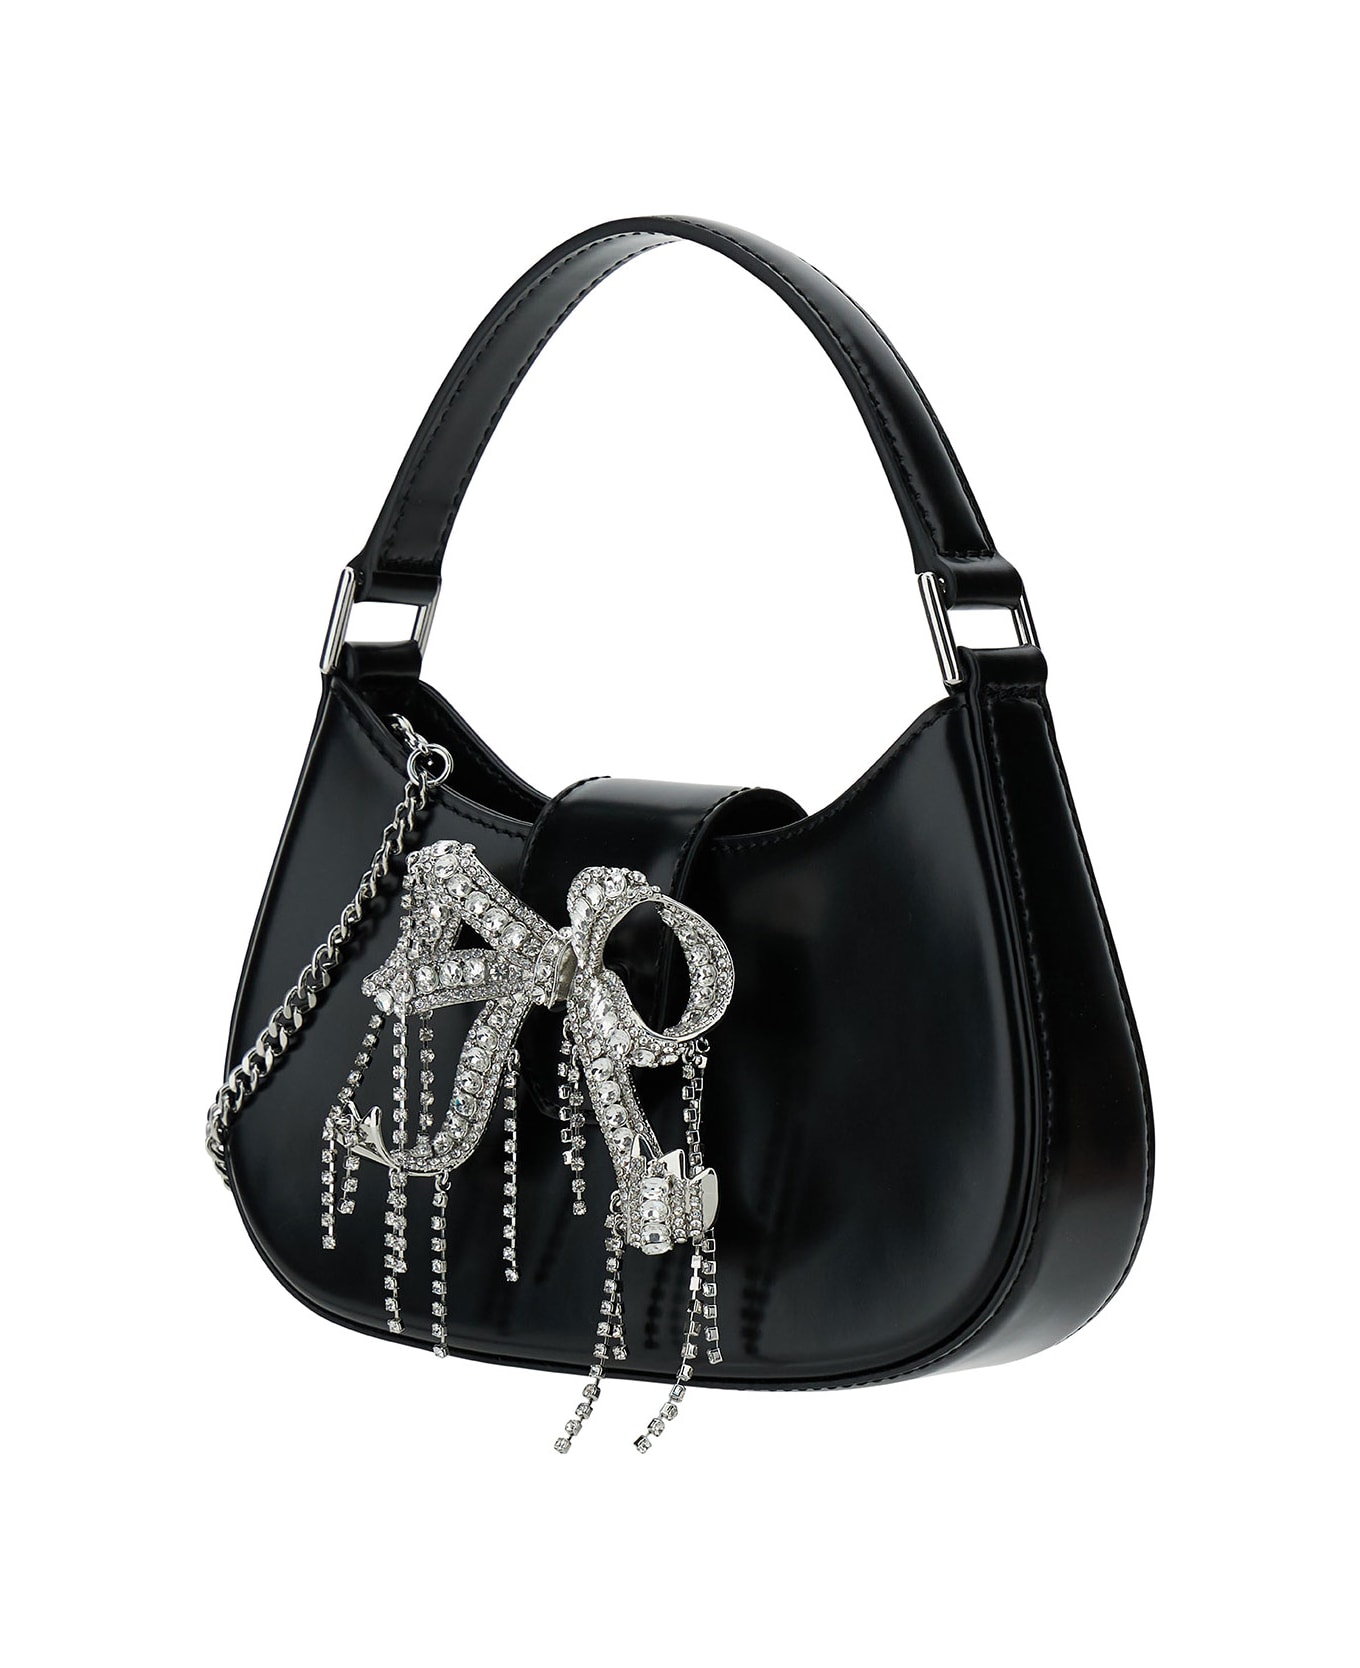 self-portrait Black Hobo Bag With Swarowski Bow Detail In Glossy Leather Woman - Black トートバッグ